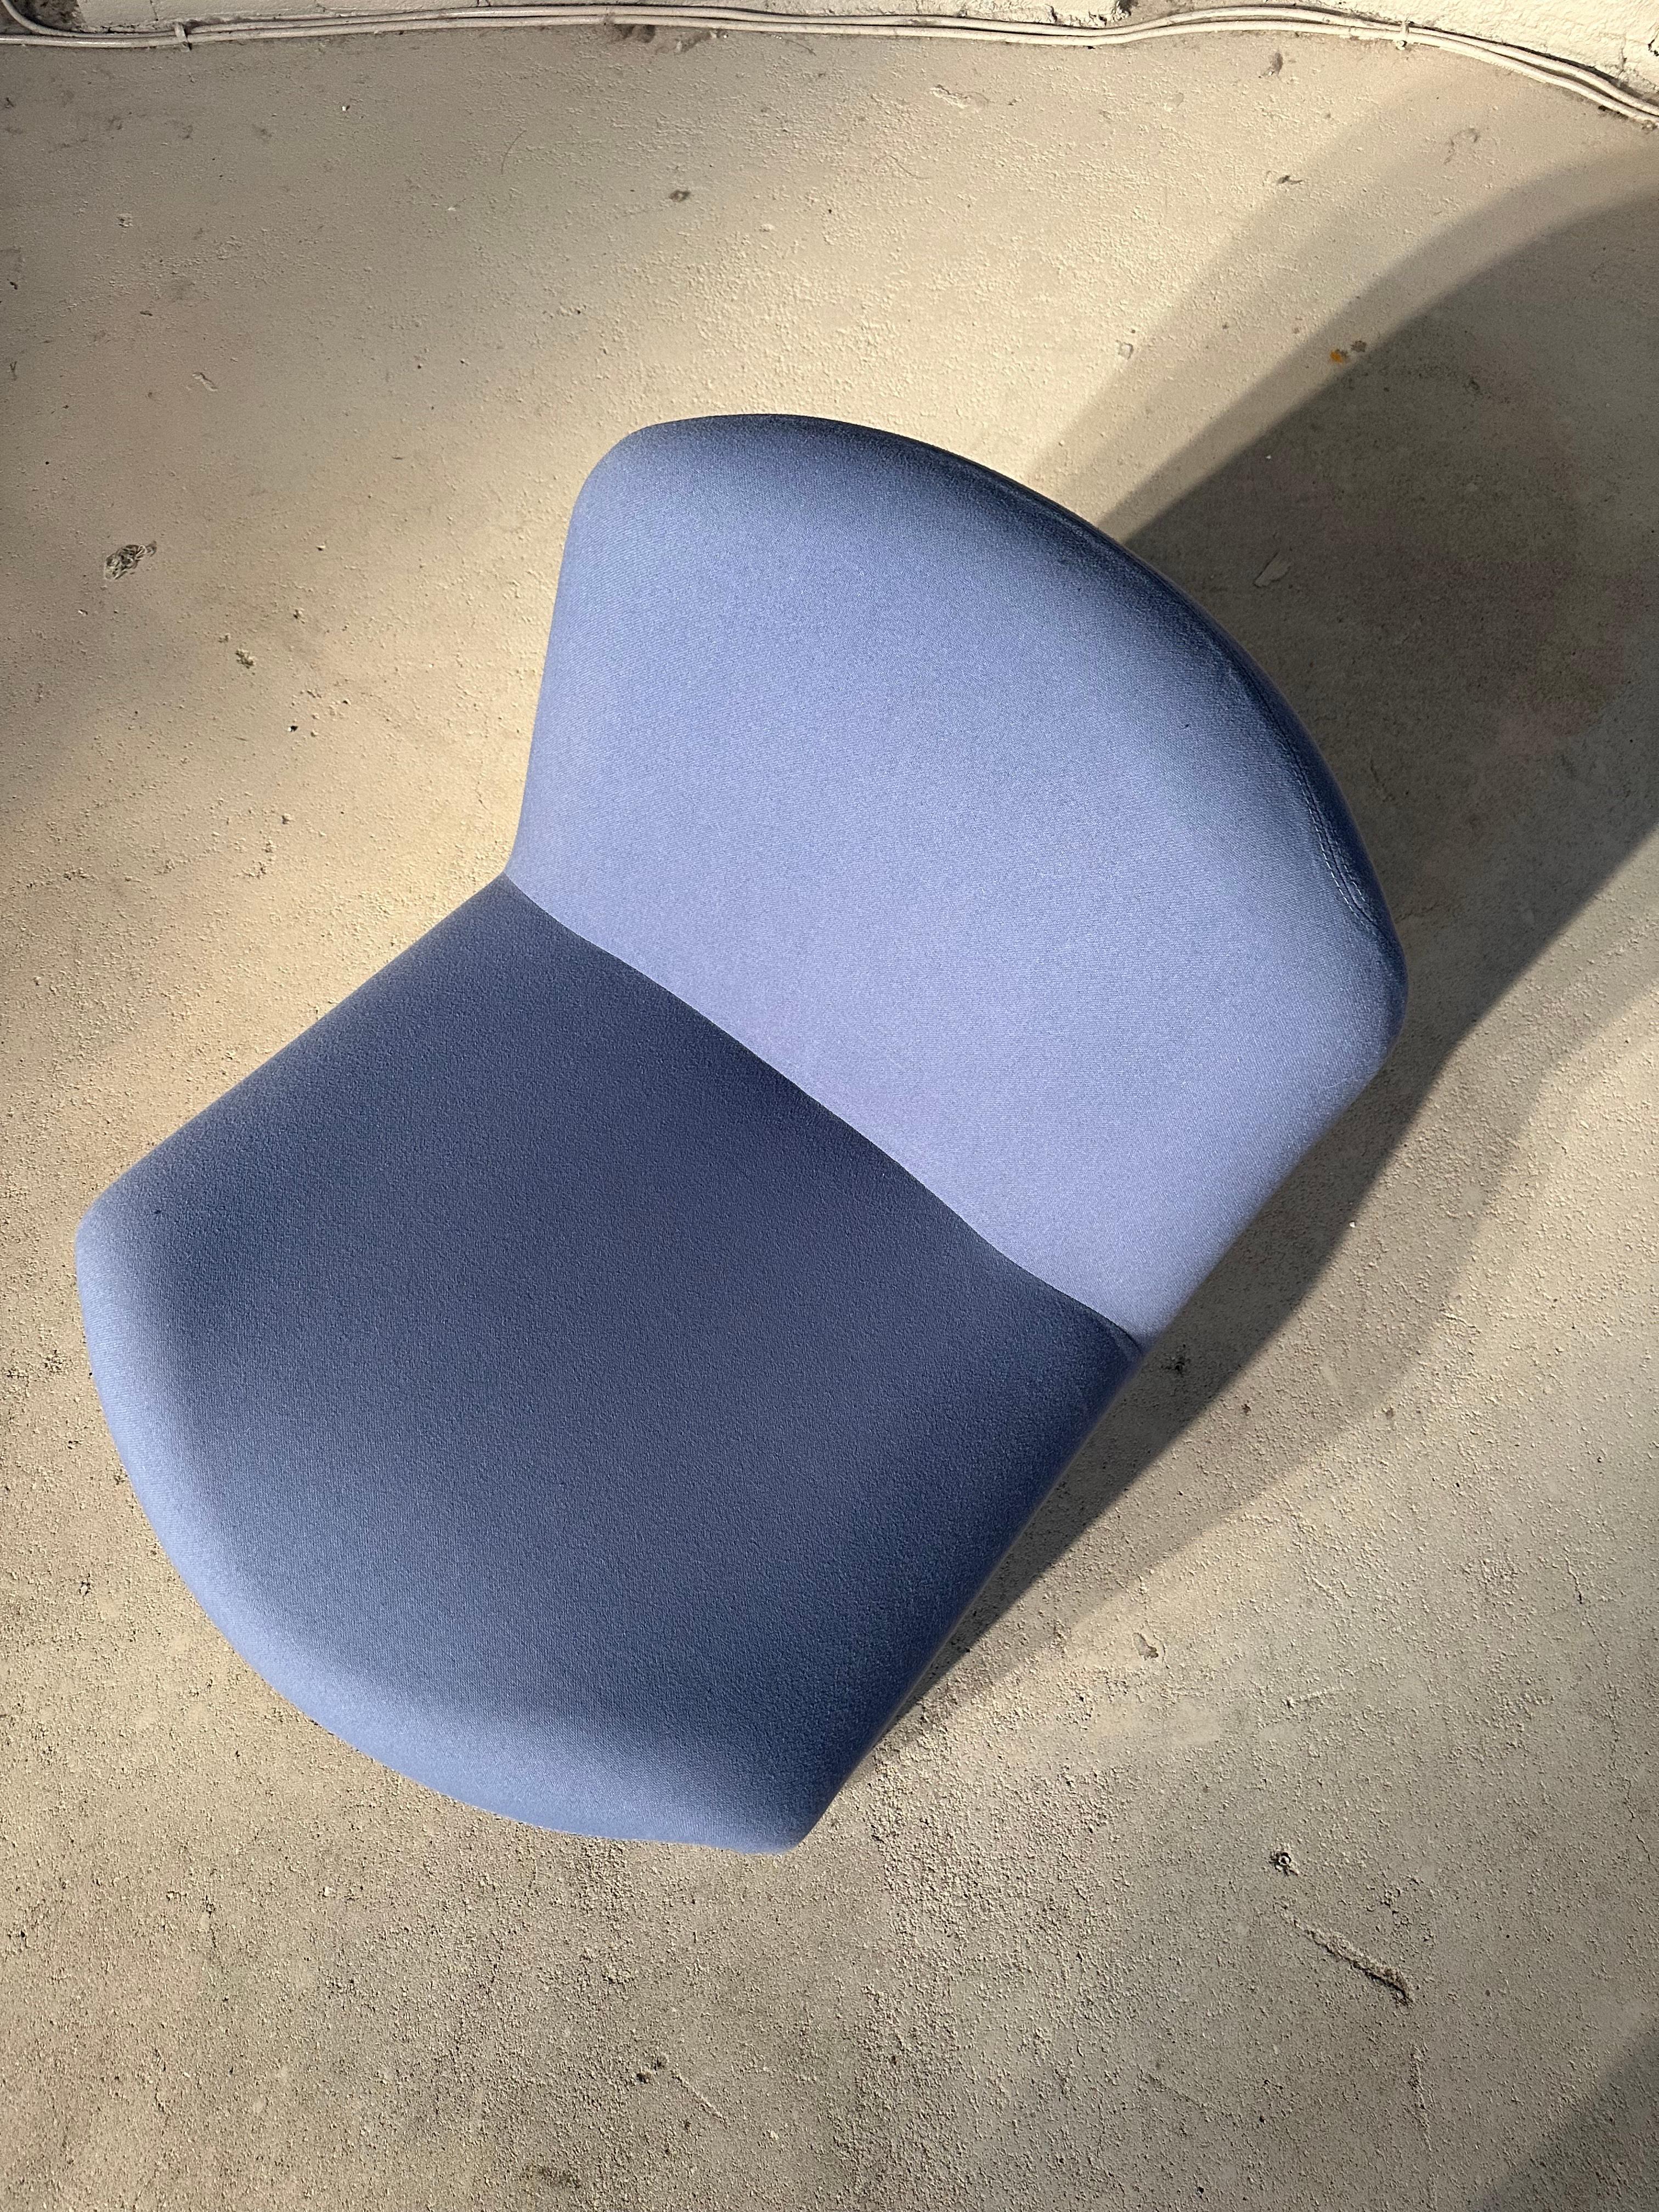 The beautiful organic curved Alky chair designed by Giancarlo Piretti in 1970 and produced by Castelli and Artifort. In an original blue fabric and outstanding vintage condition.

We found this gem in an original fabric during one of our travels to